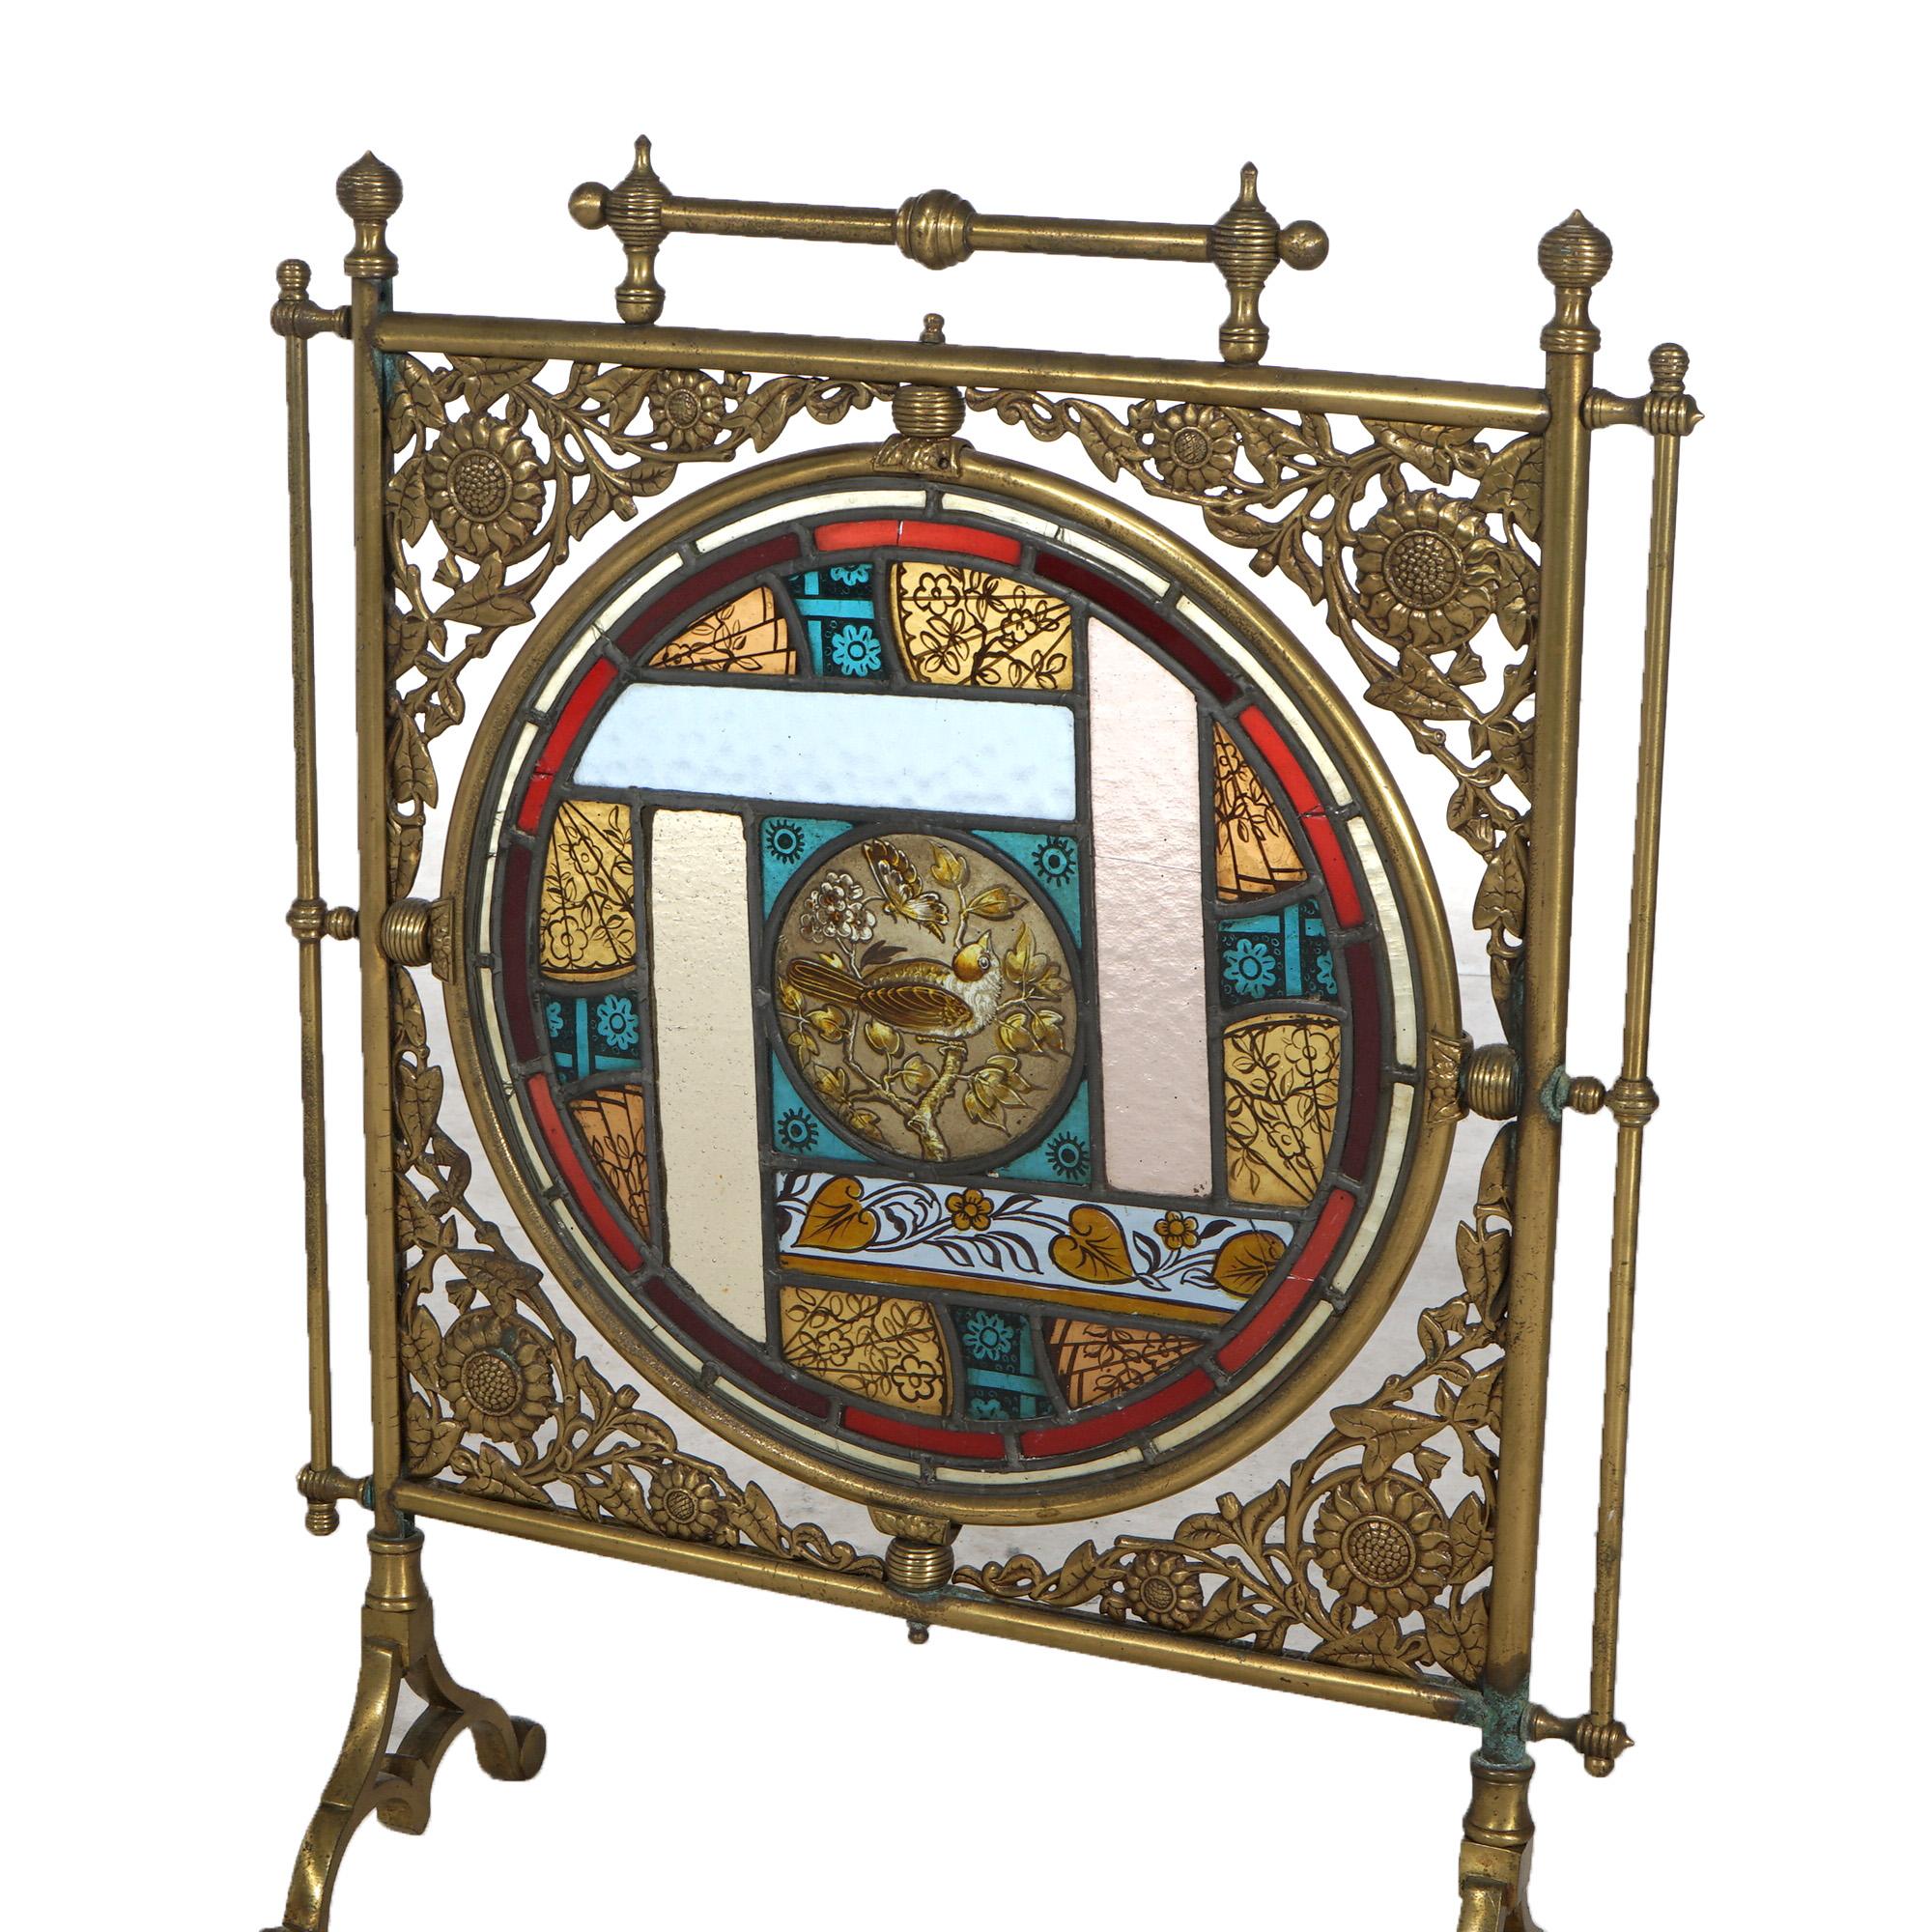 Aesthetic Movement Antique Aesthetic Bradley & Hubbard Fireplace Screen, Brass & Stained Glass 